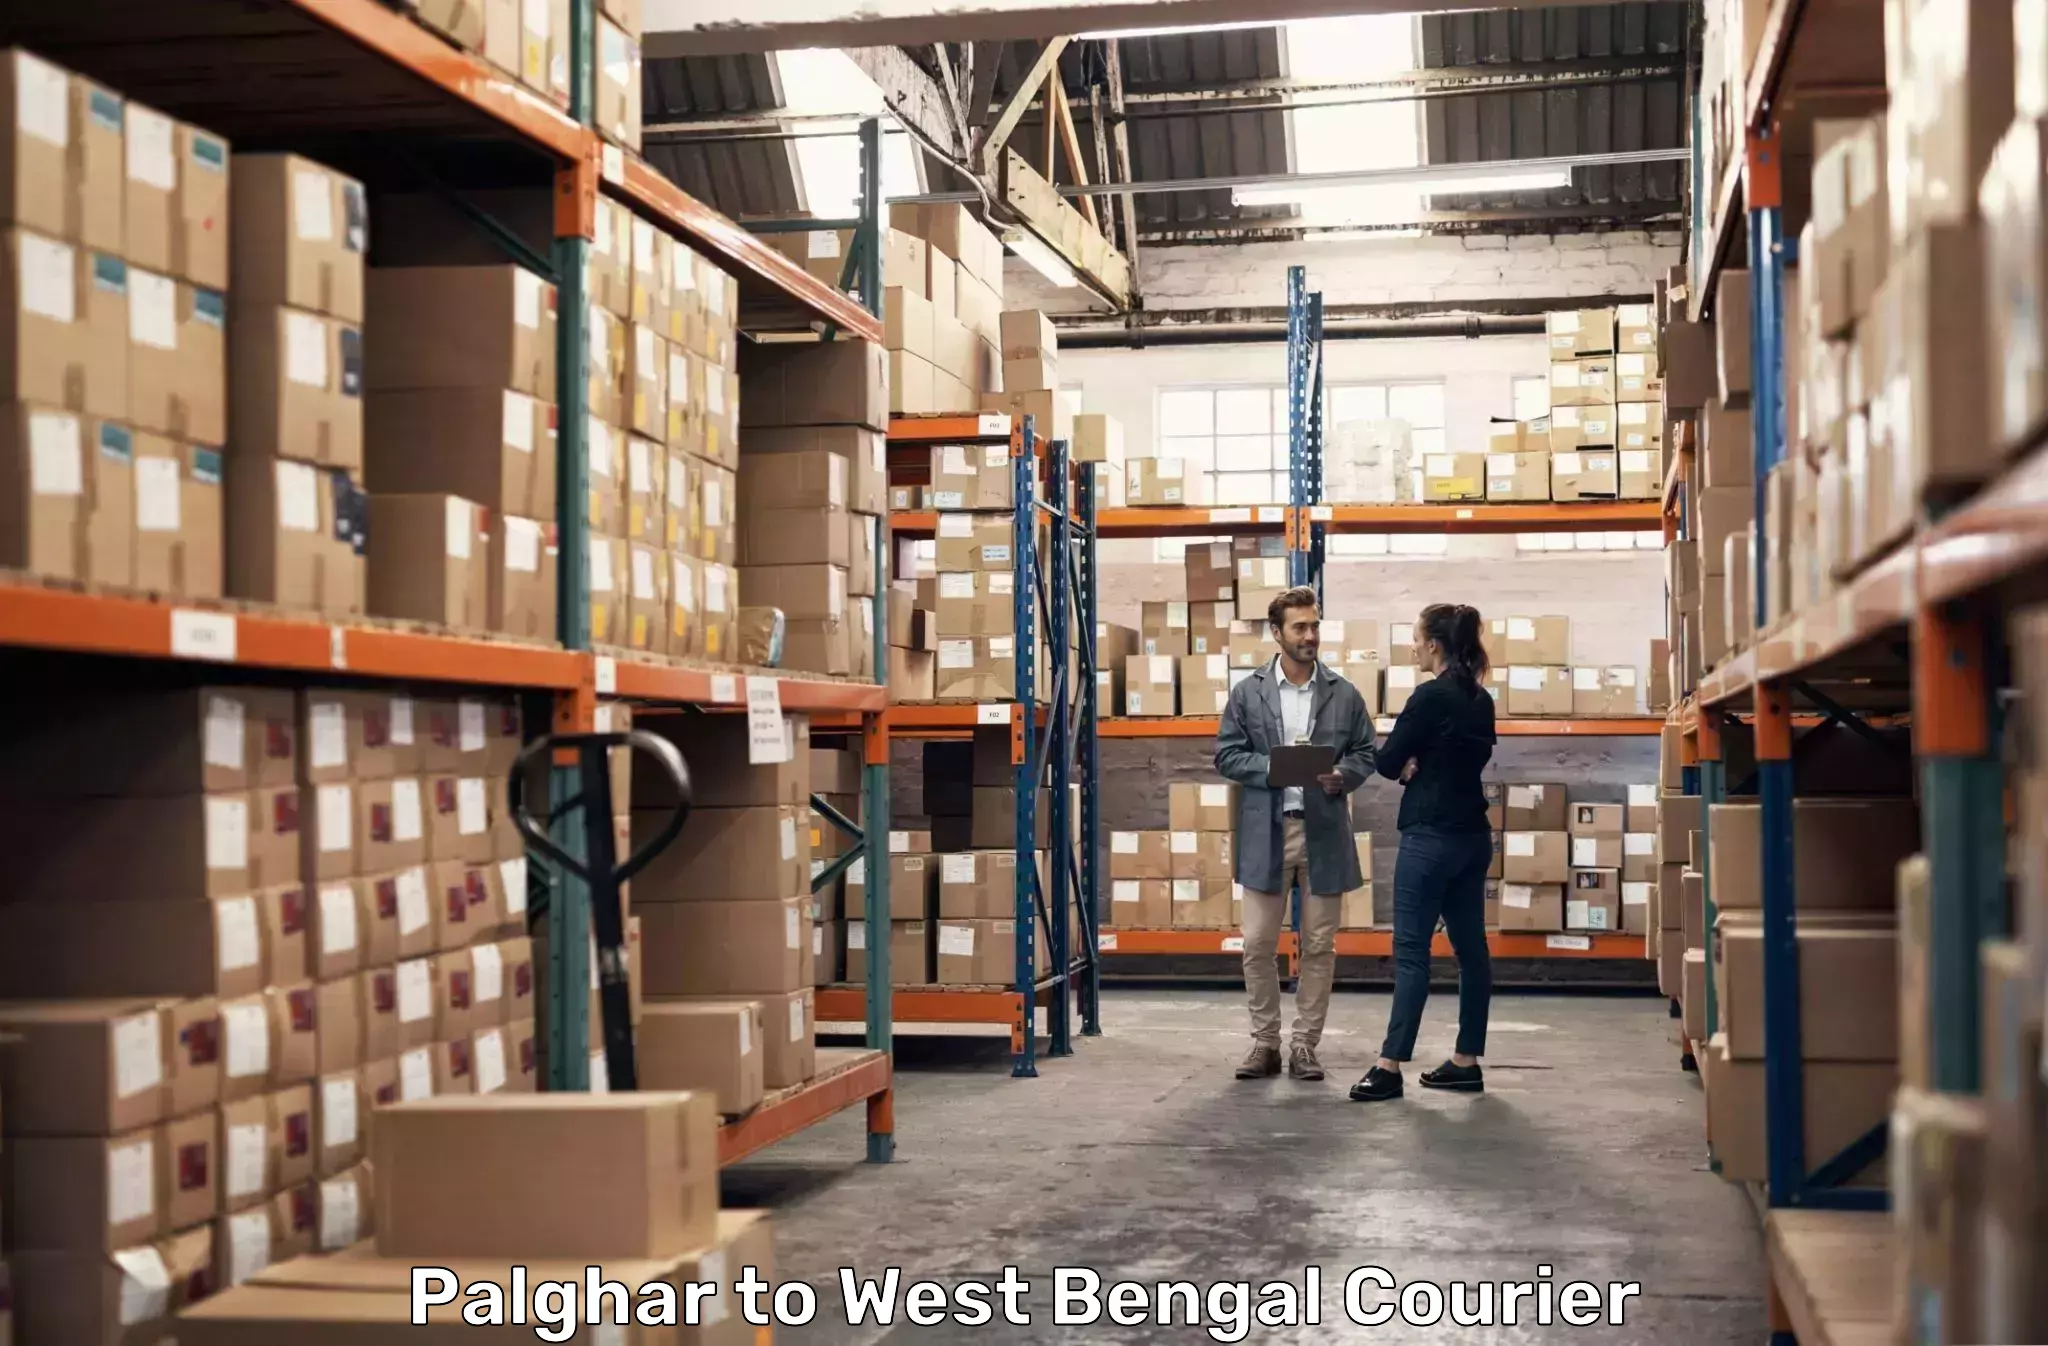 Business delivery service Palghar to Para Purulia